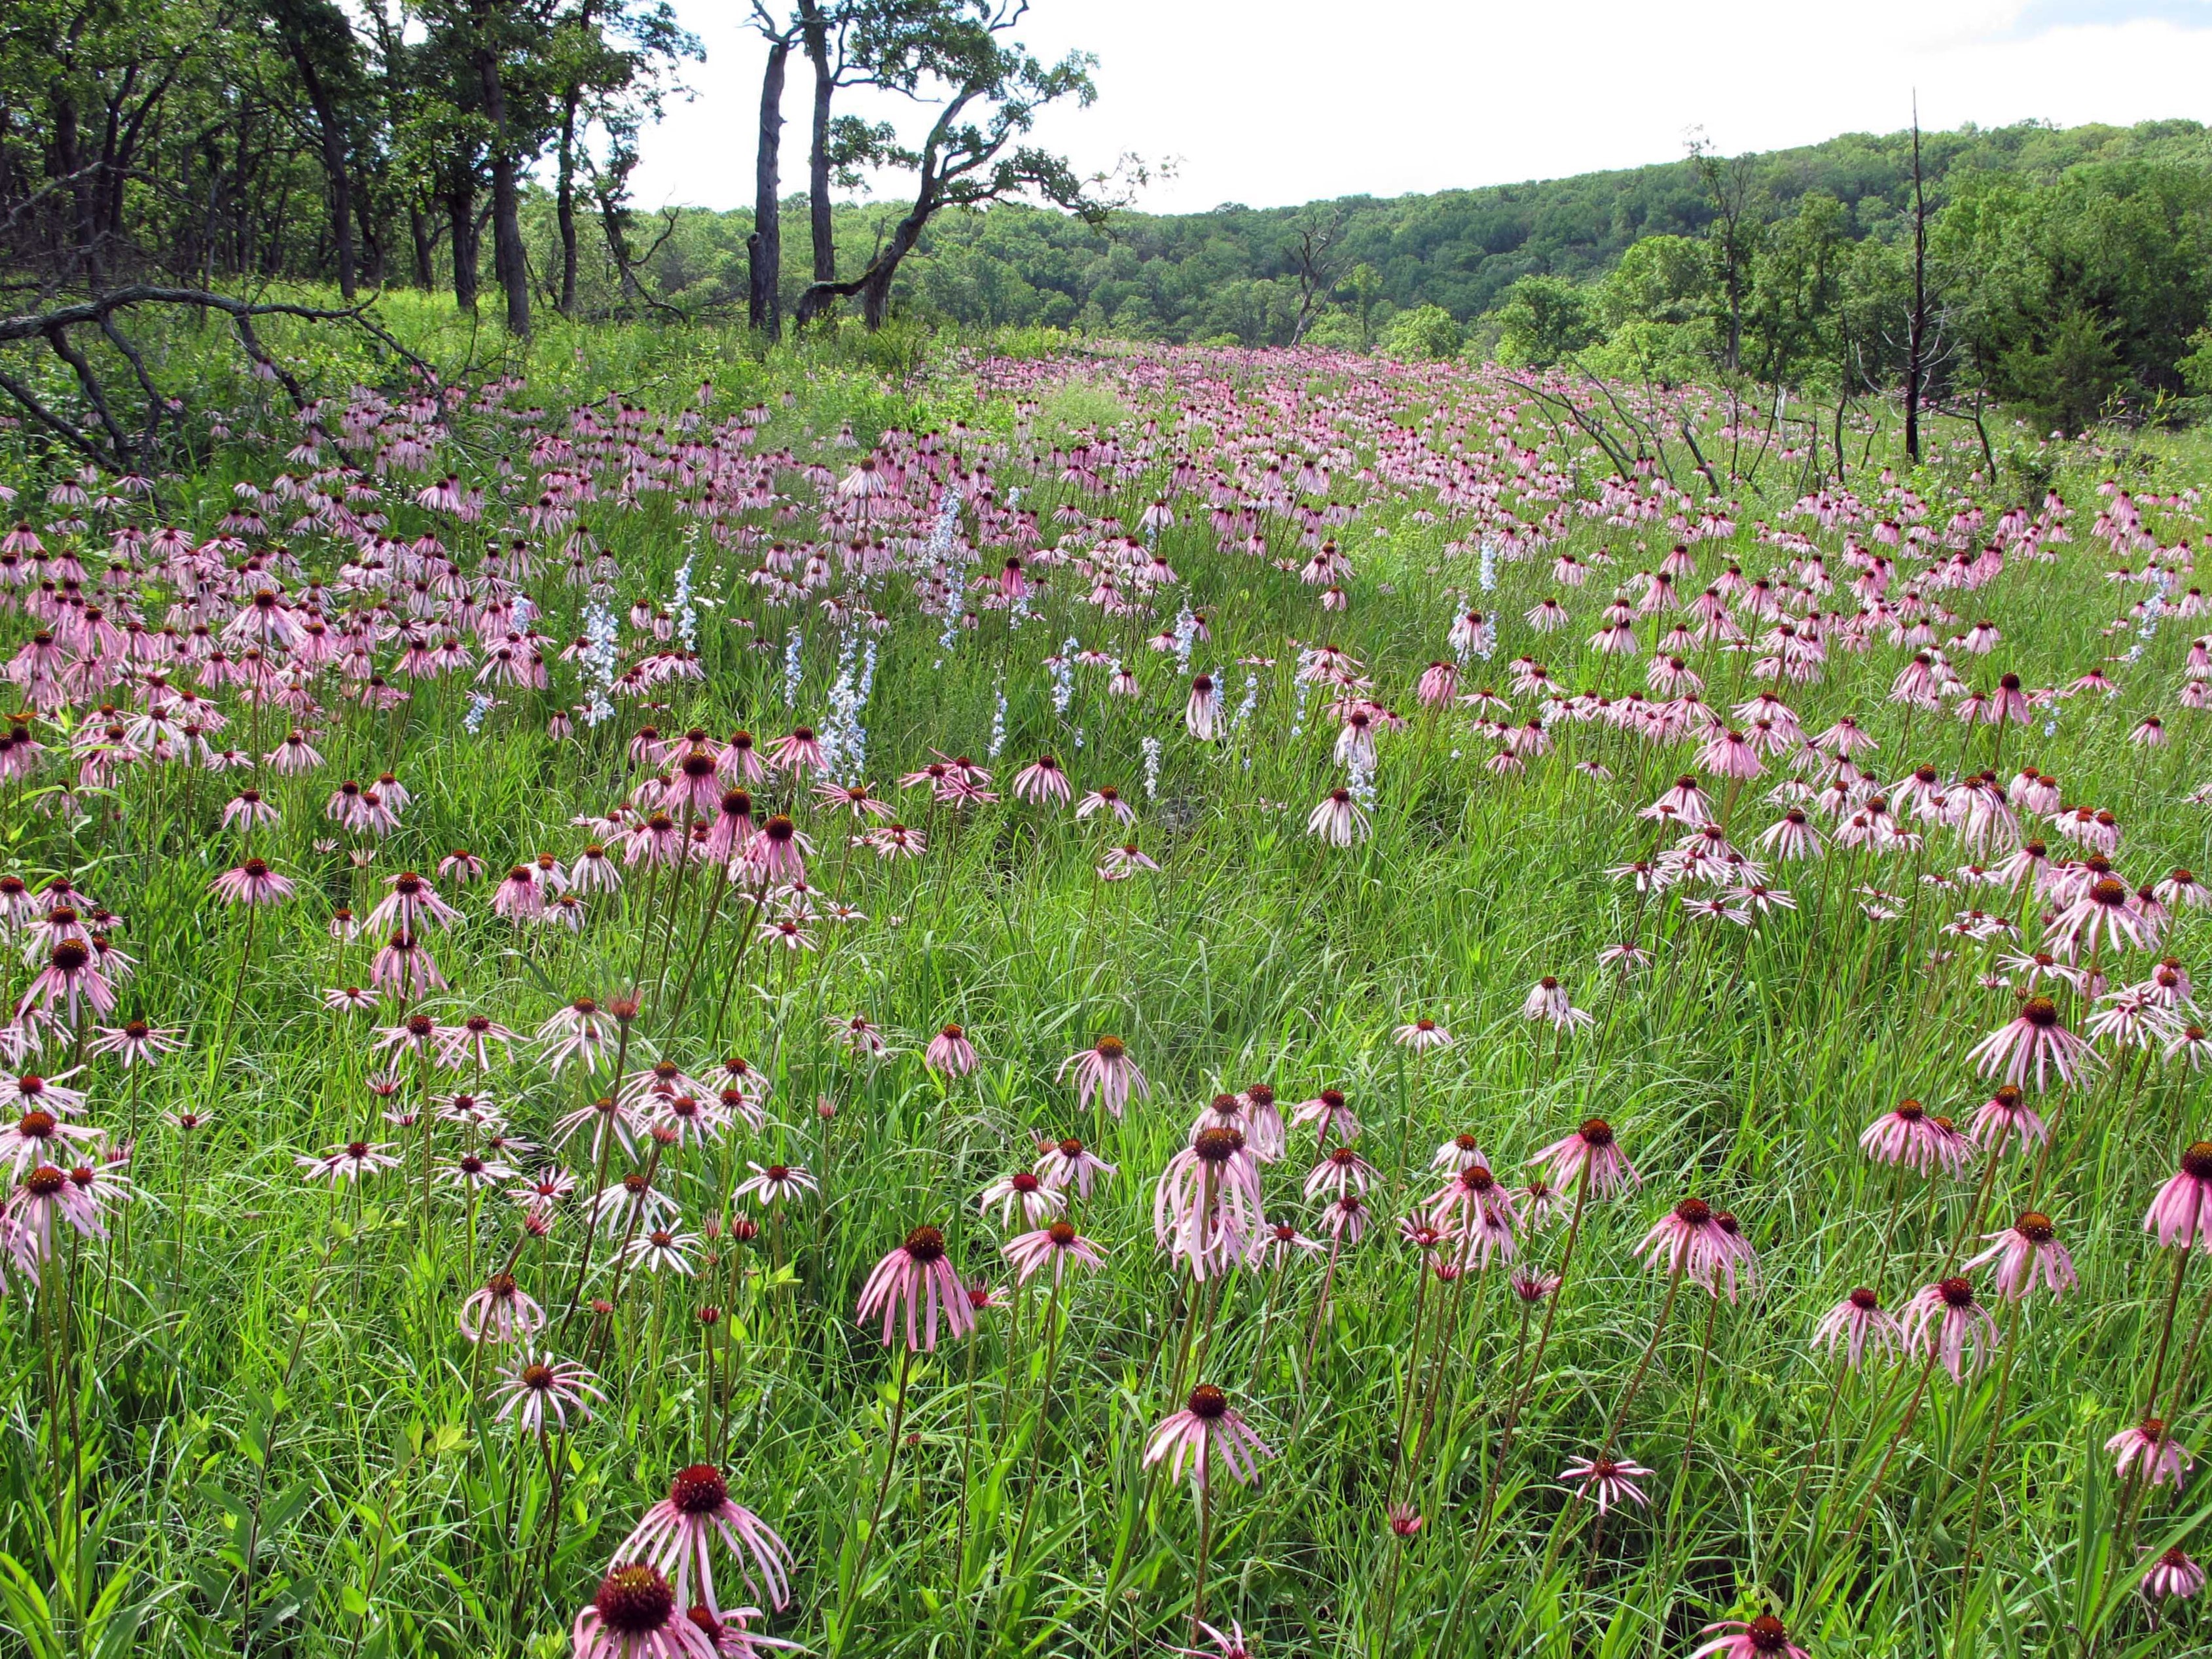 Purple coneflowers in bloom on a glade at Danville Conservation Area.